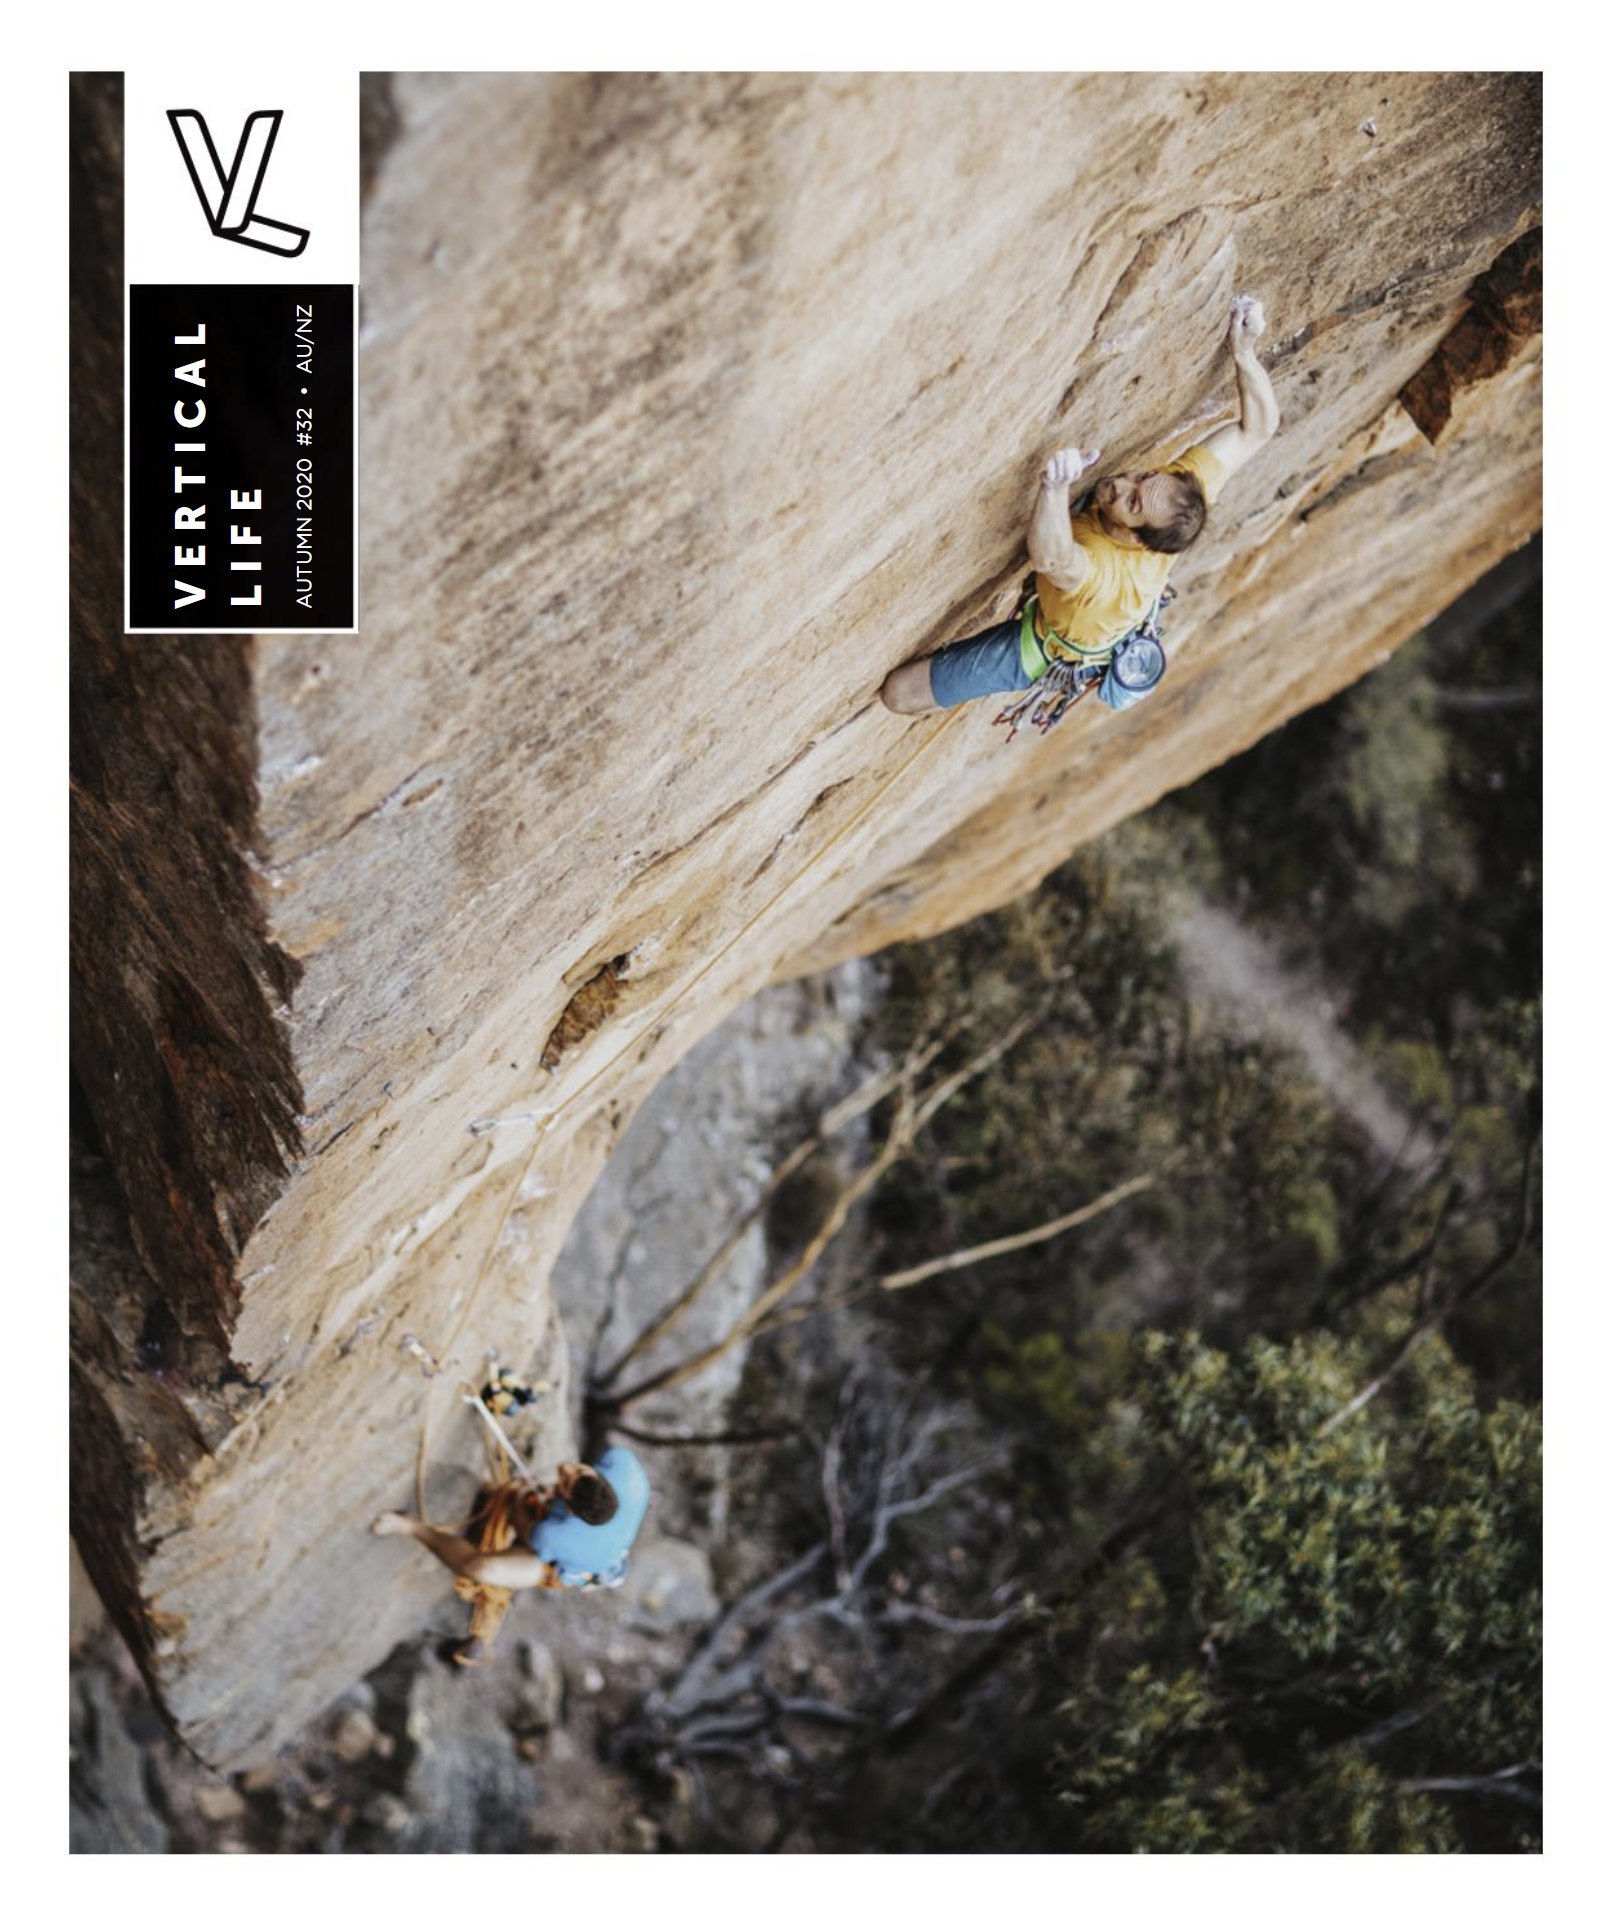 Kamil Sustiak - Vertical Life - cover - issue 32 .png